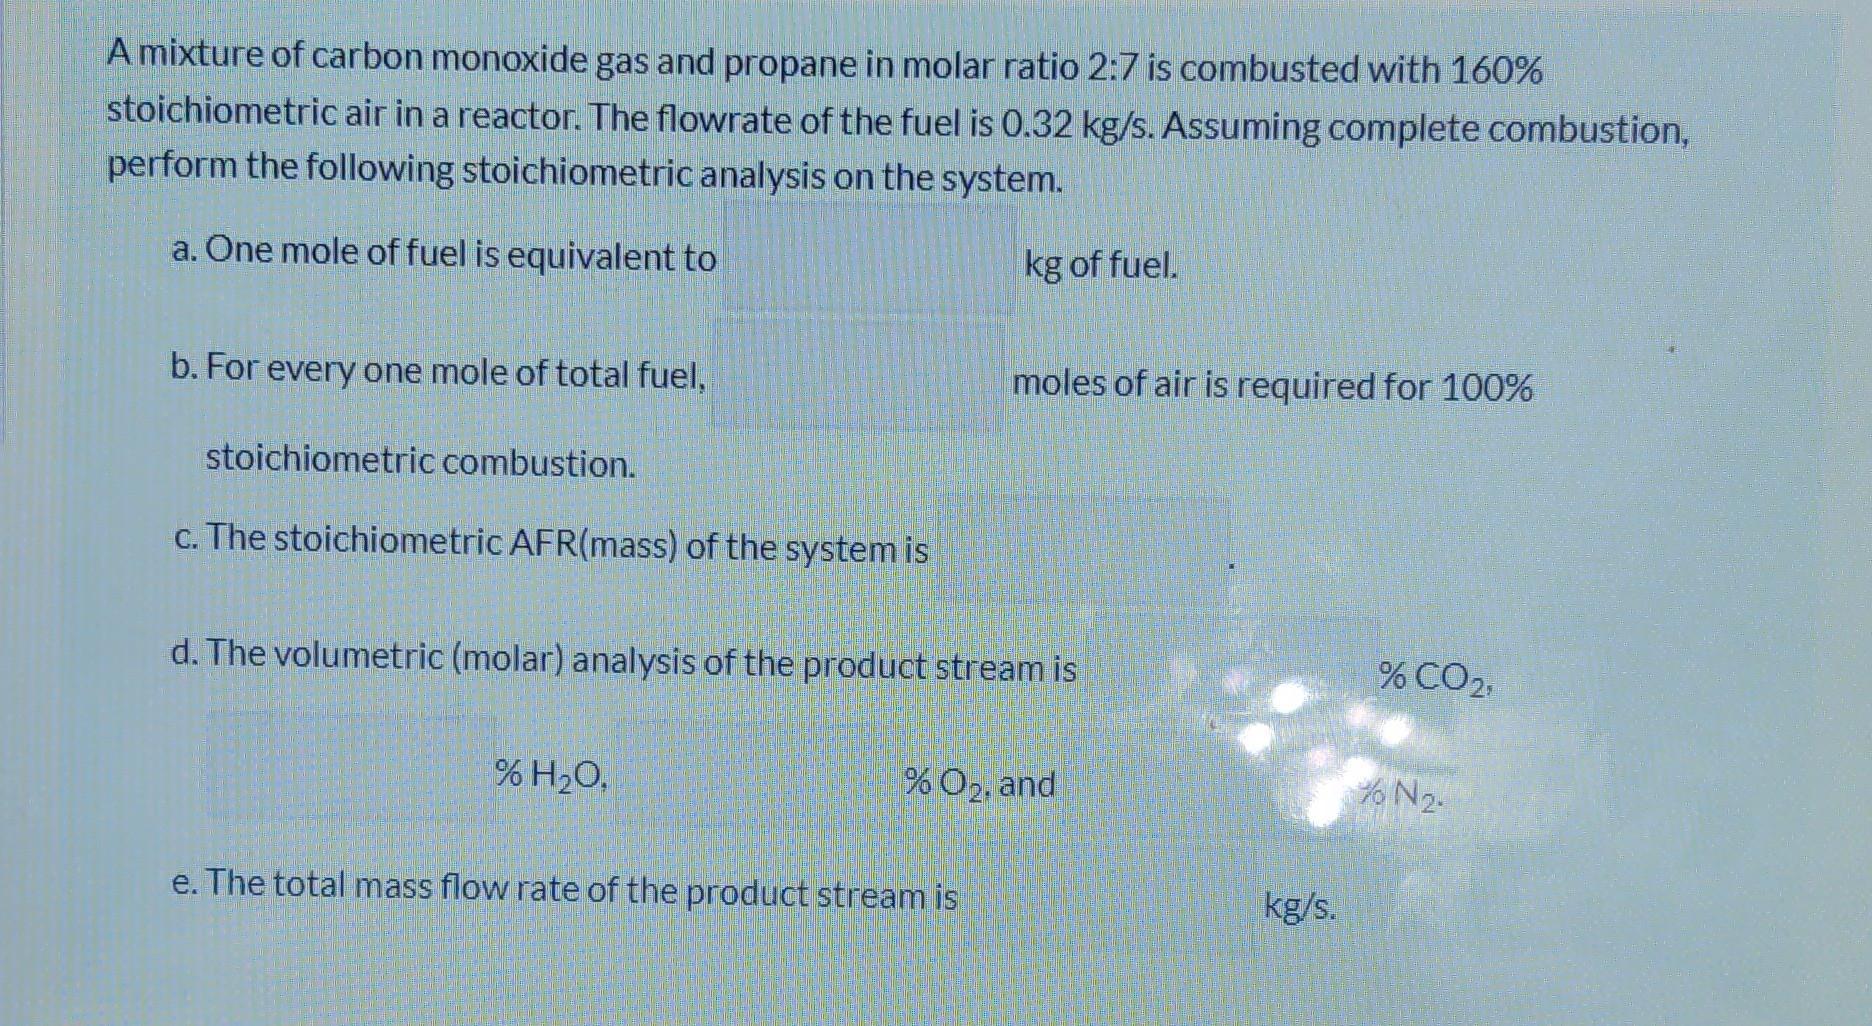 A mixture of carbon monoxide gas and propane in molar ratio 2:7 is combusted with 160% stoichiometric air in